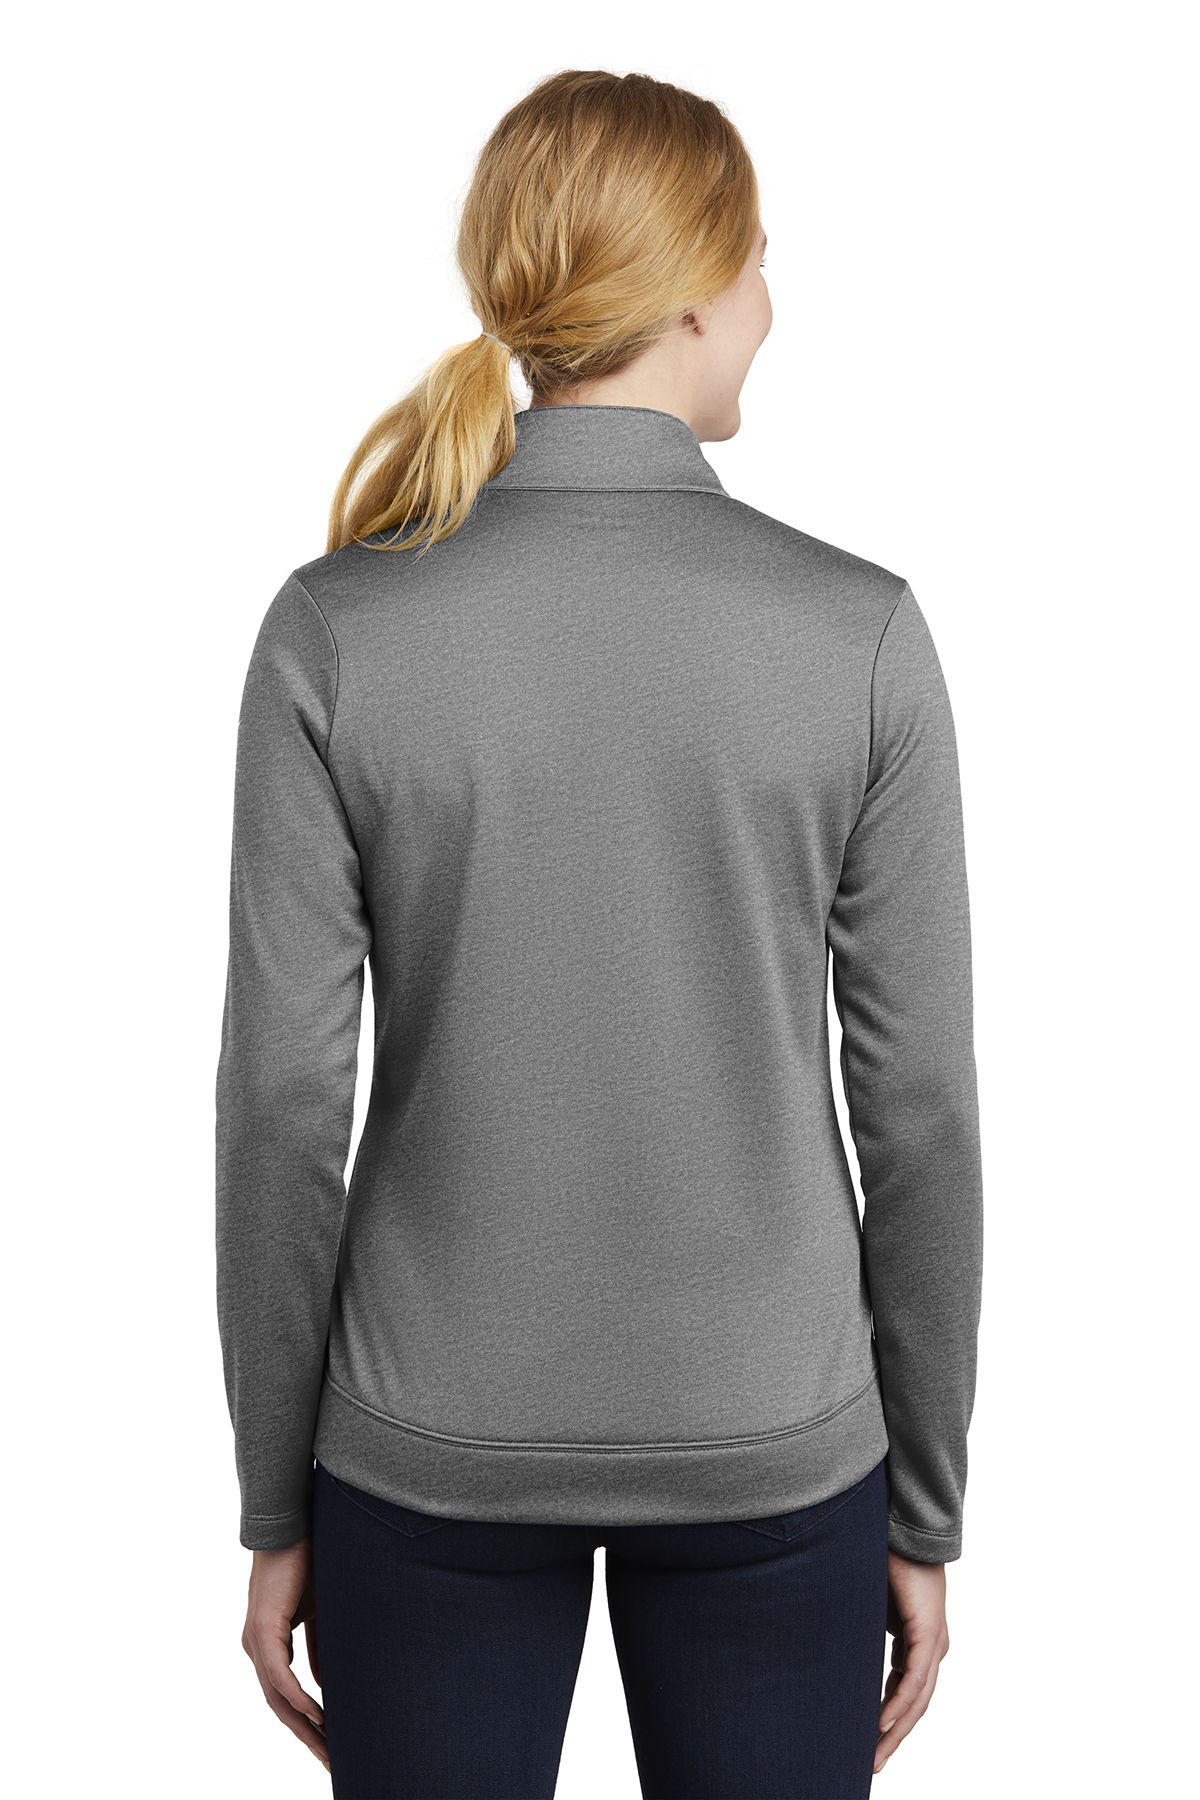 Nike Ladies Therma-FIT Full-Zip Fleece | Product | Company Casuals